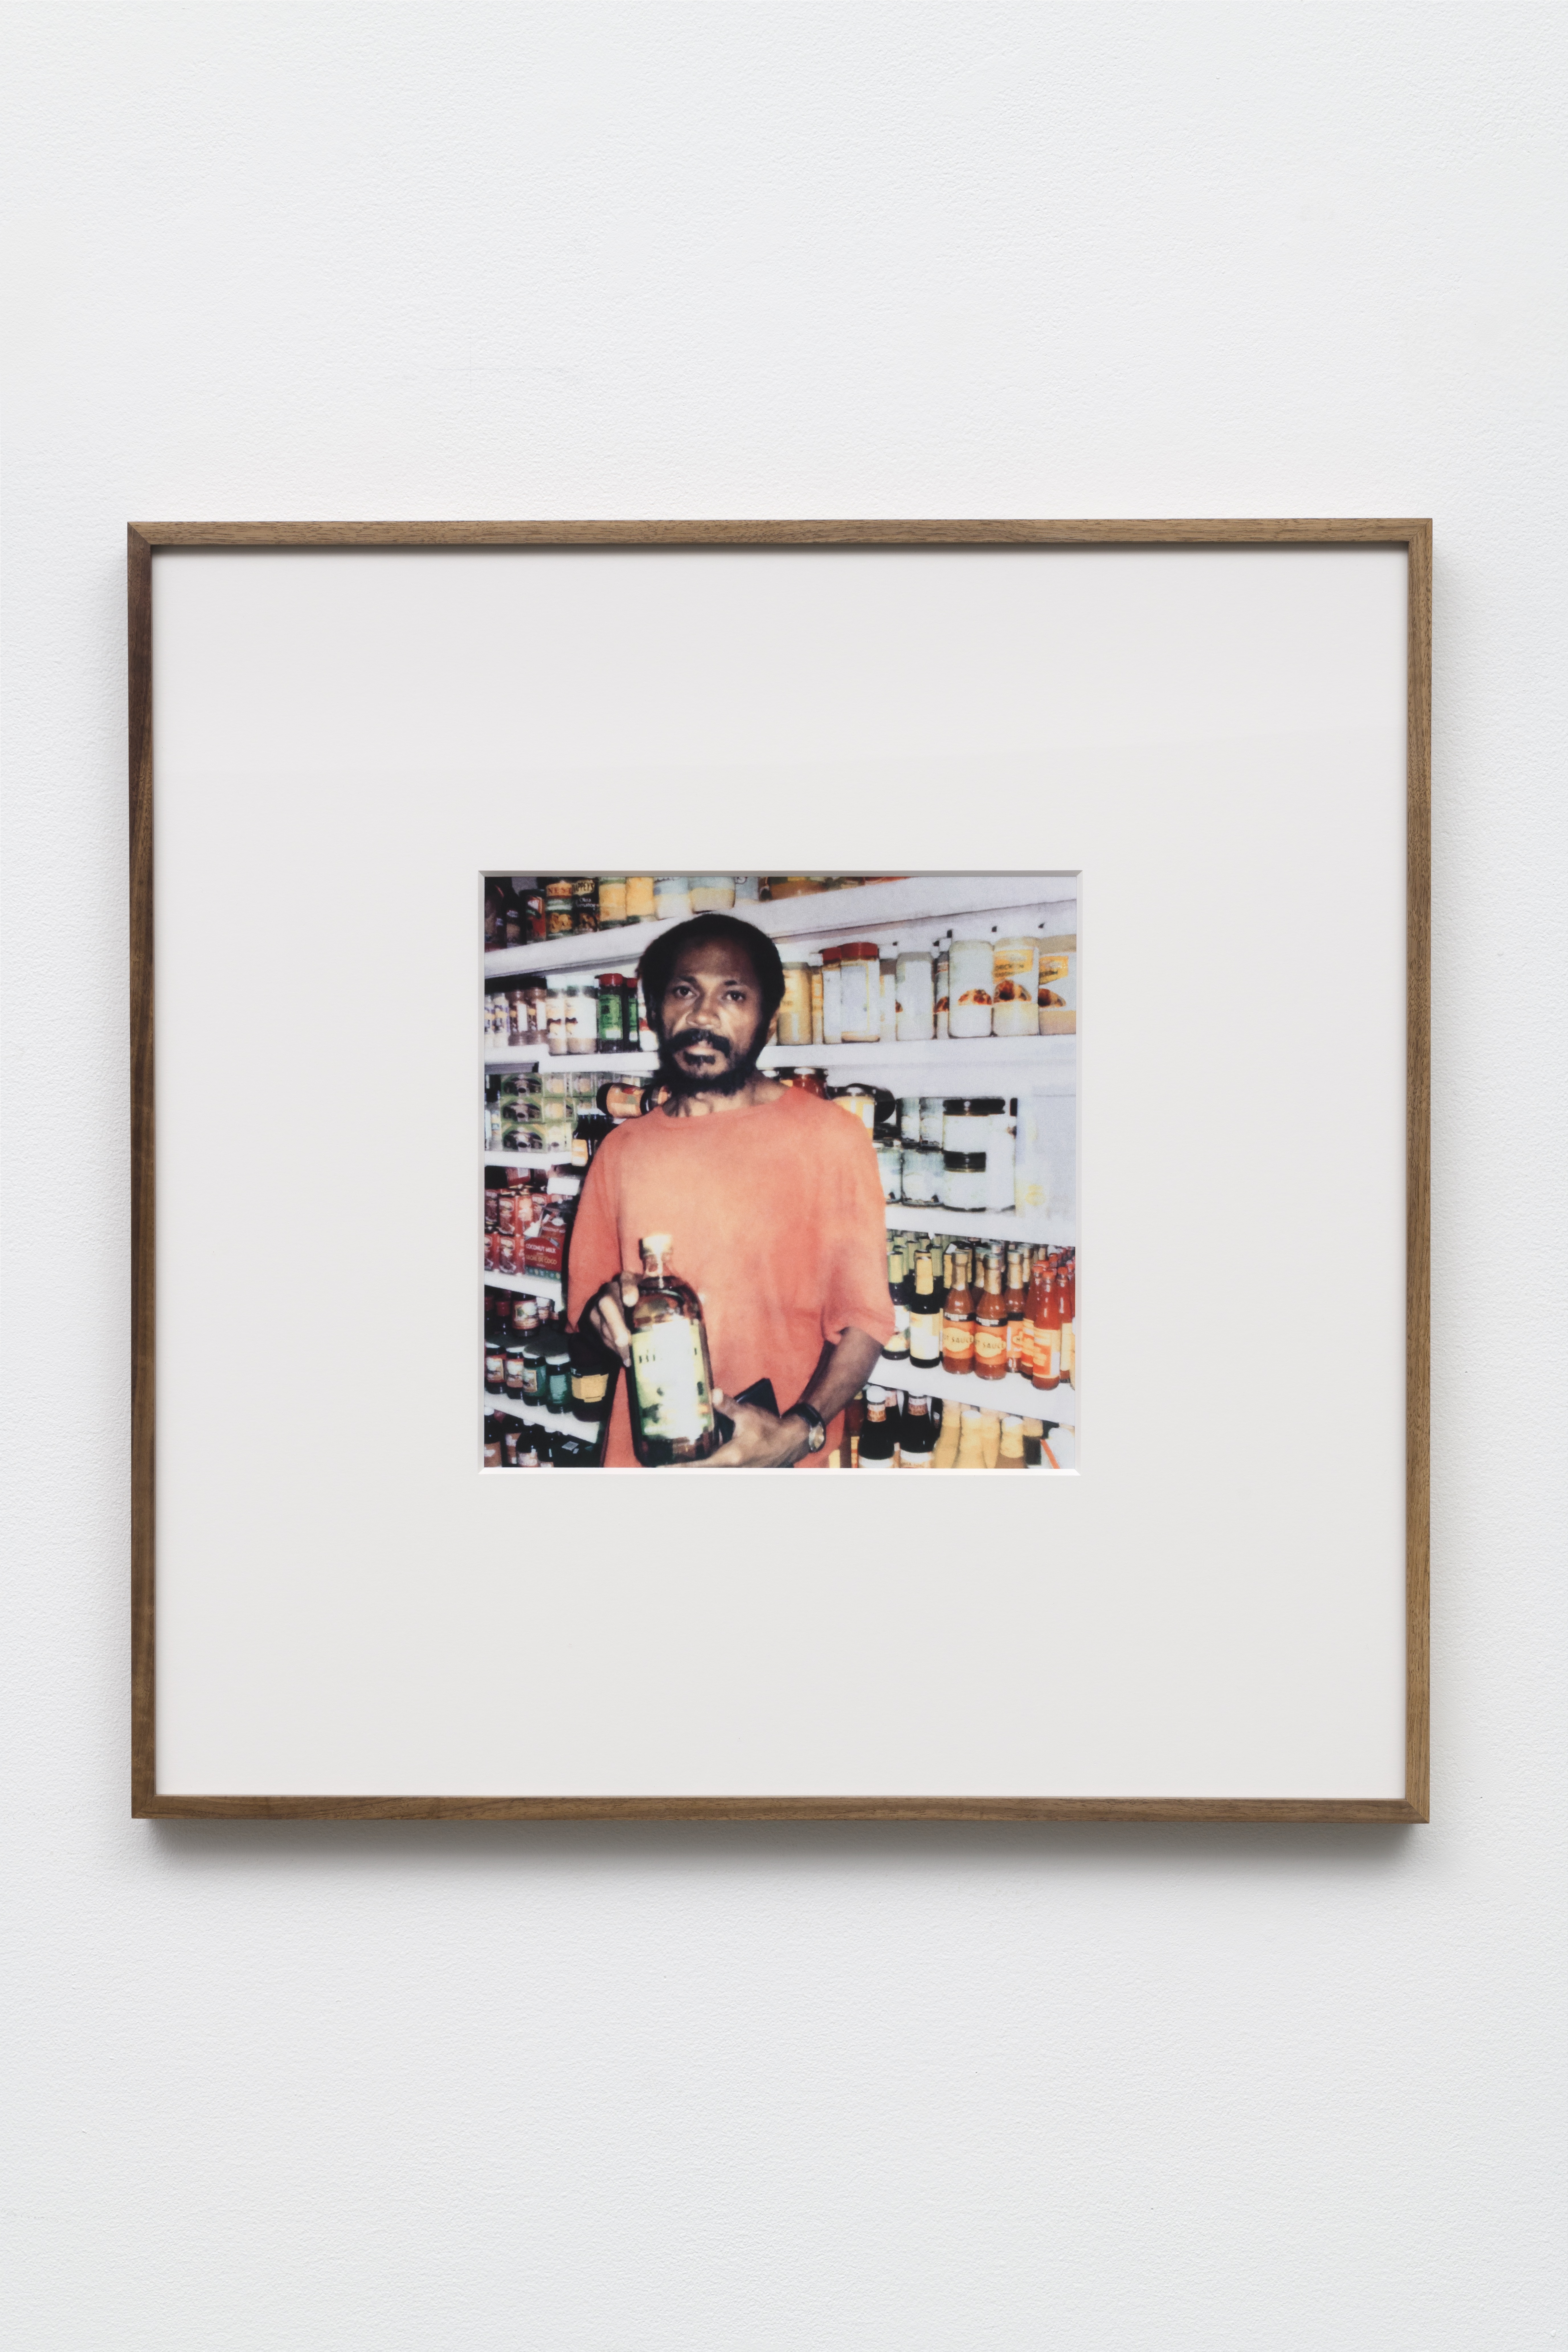 This is a photograph of a framed photograph of a man in a grocery holding a bottle taken by artist Mohamed Bourouissa